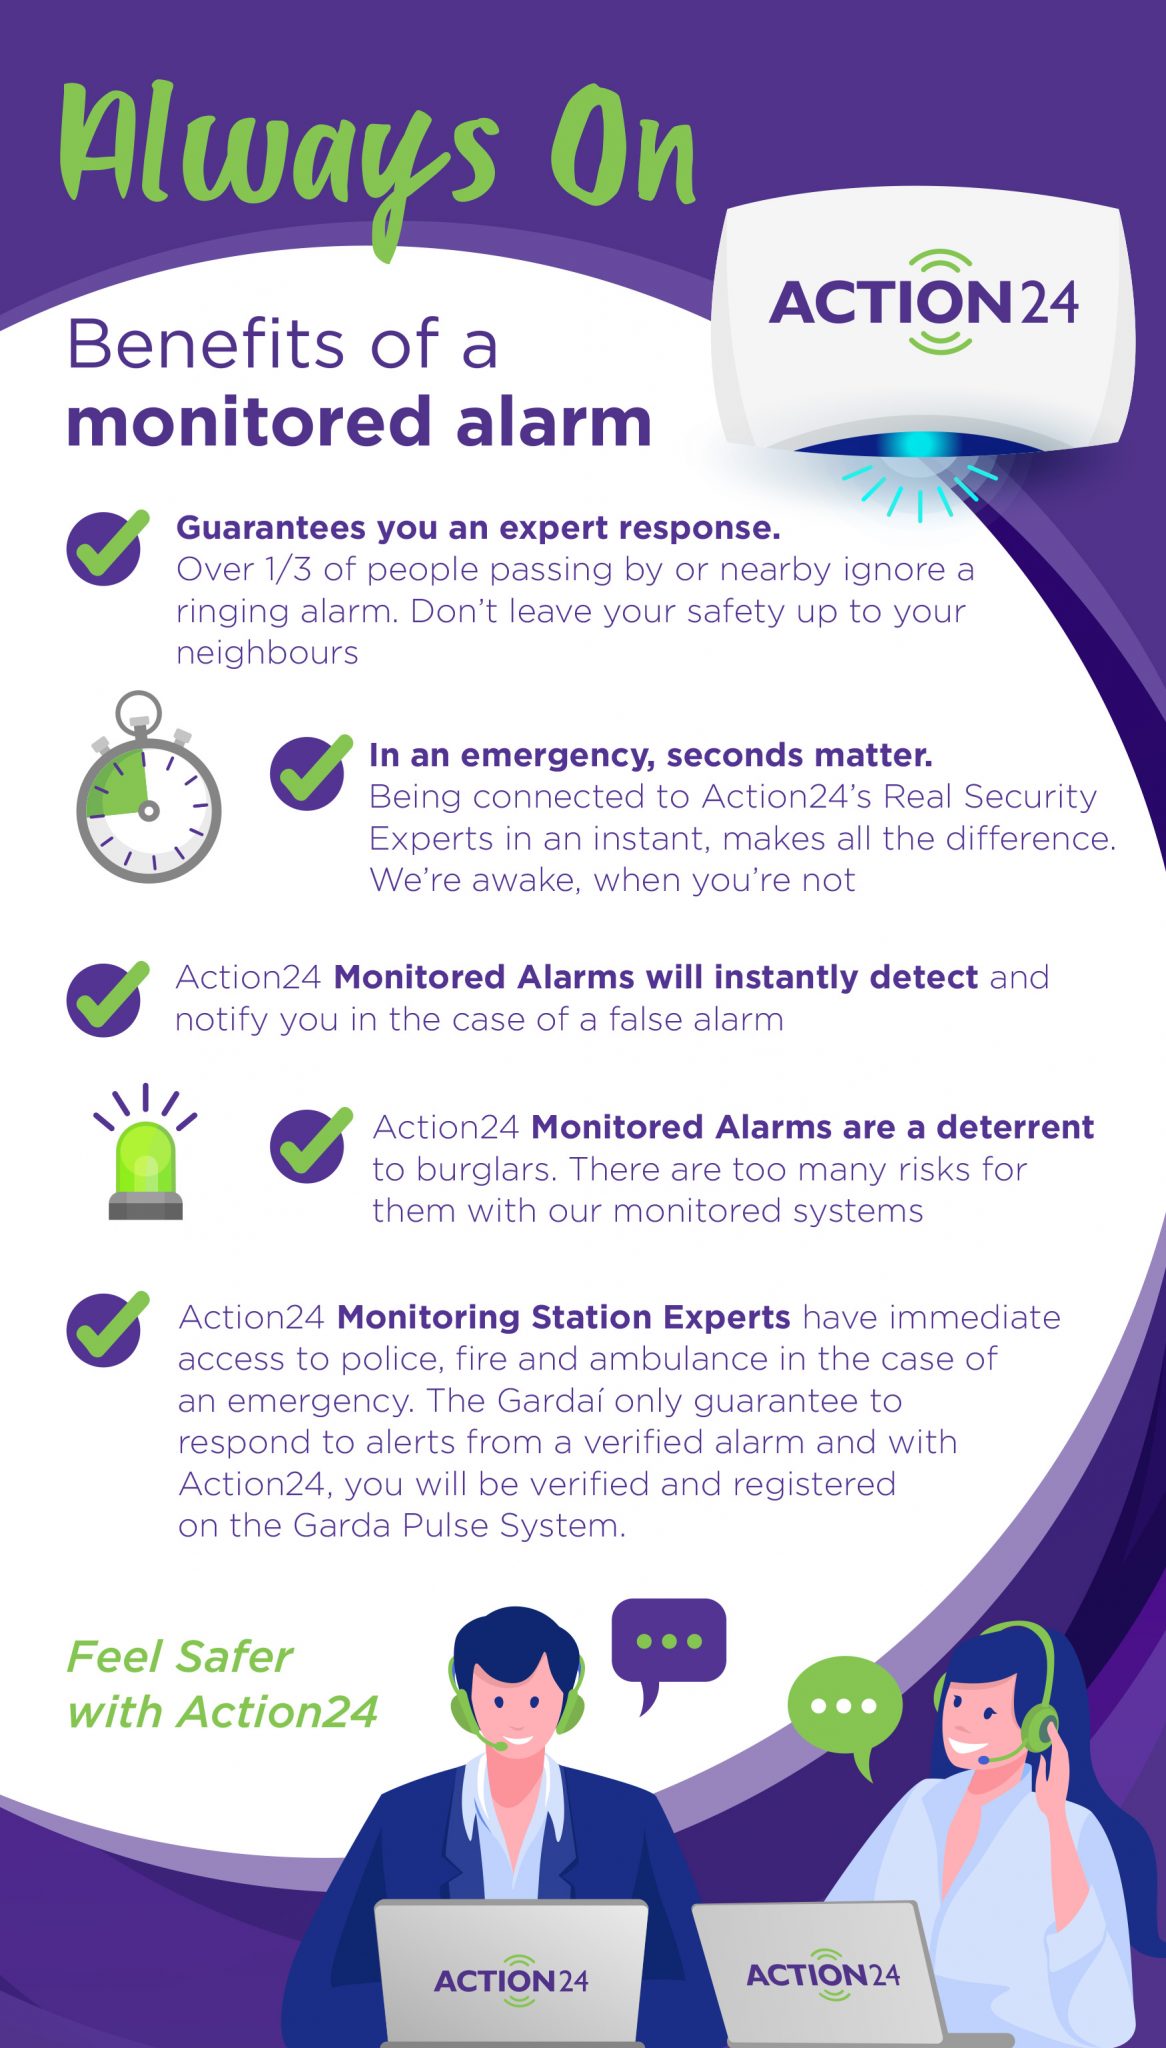 What are the Benefits of a Monitored Alarm system